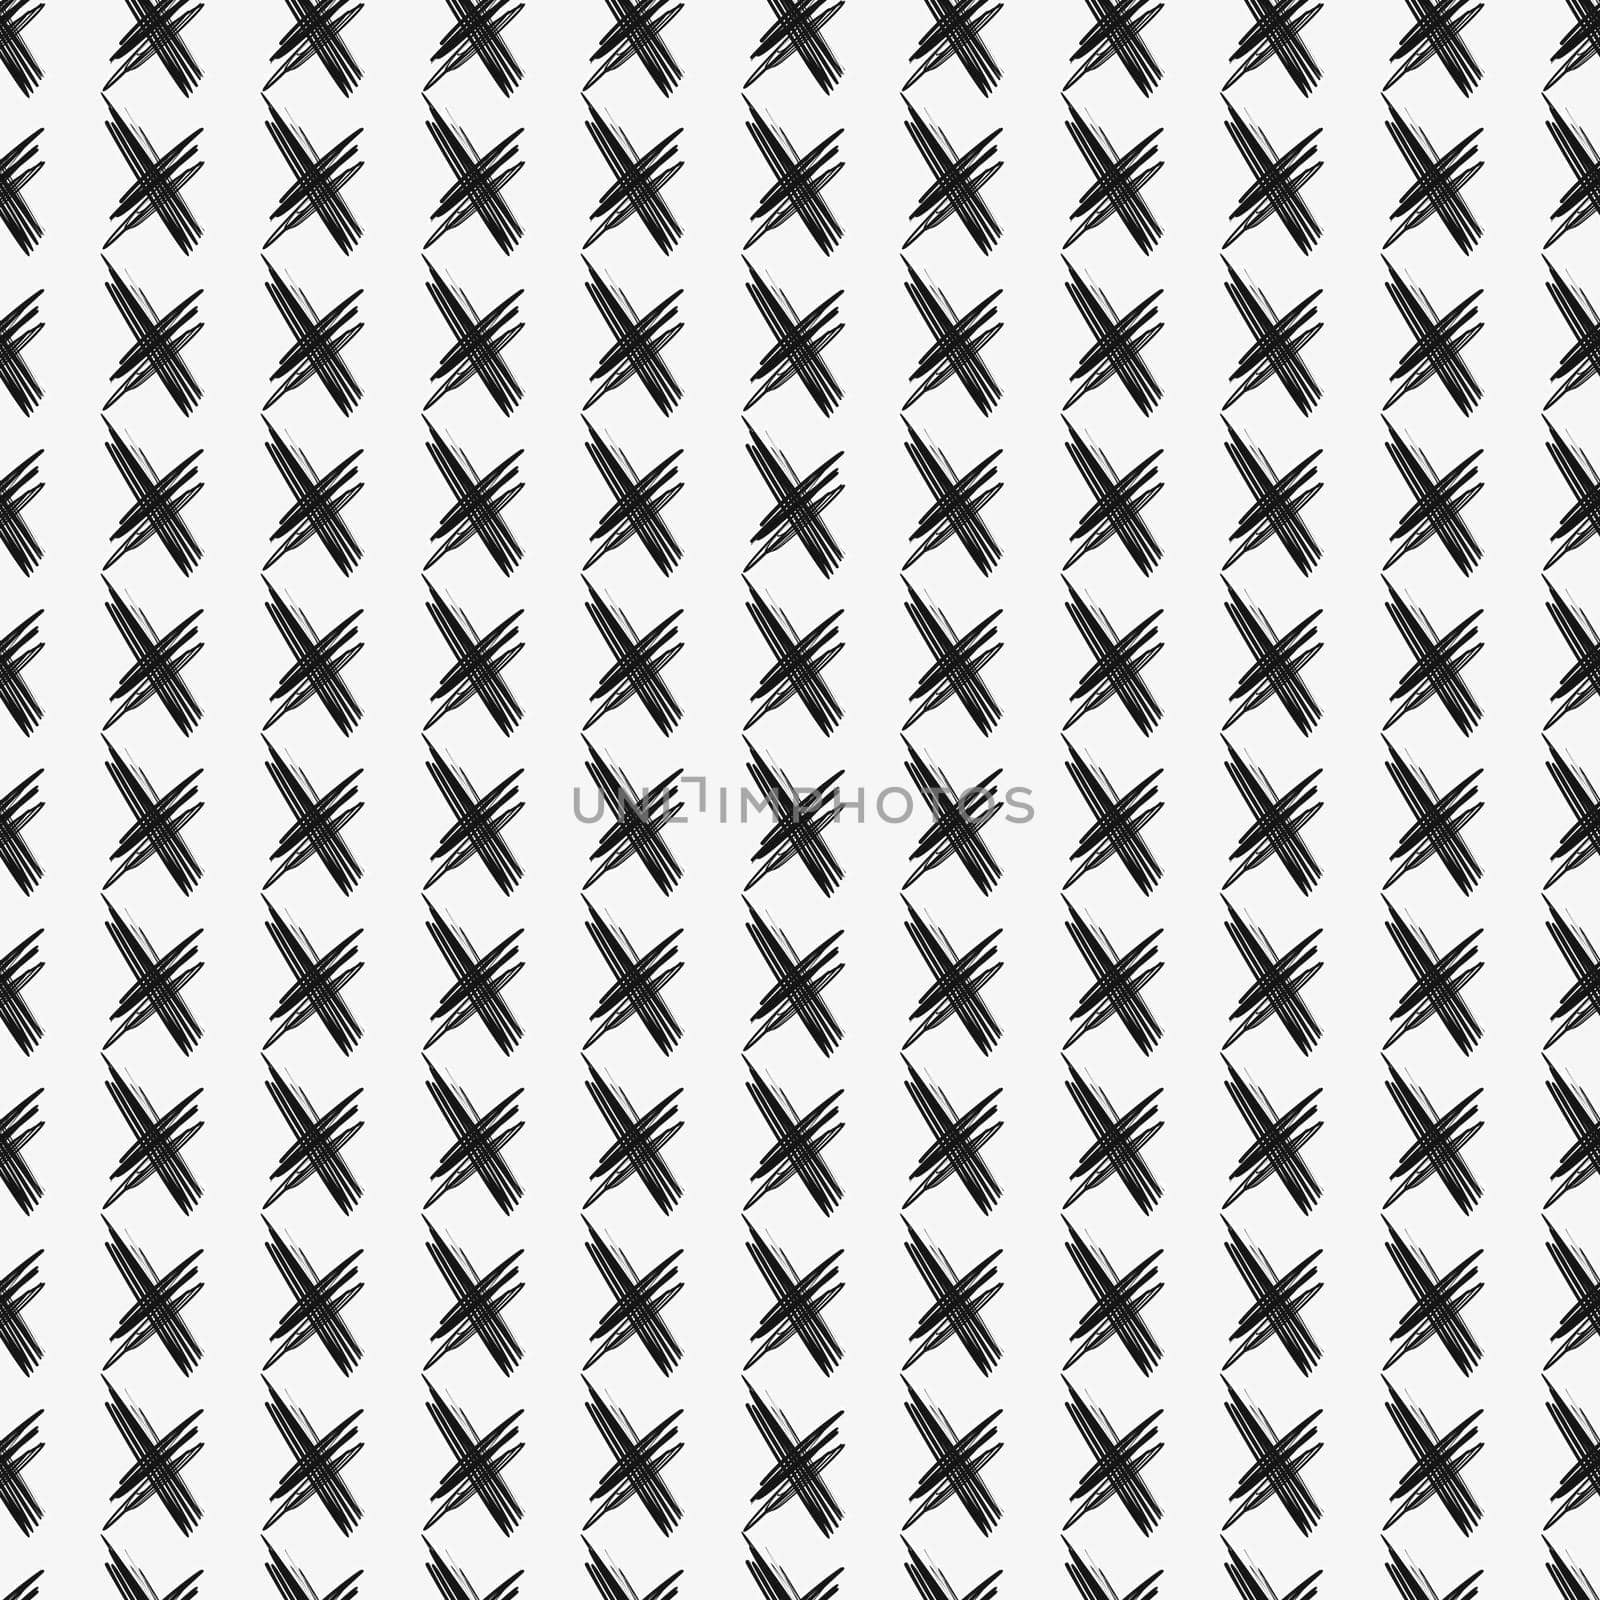 Ink abstract cross seamless pattern. Background with artistic strokes in black and white sketchy style. Design element for backdrops and textile.